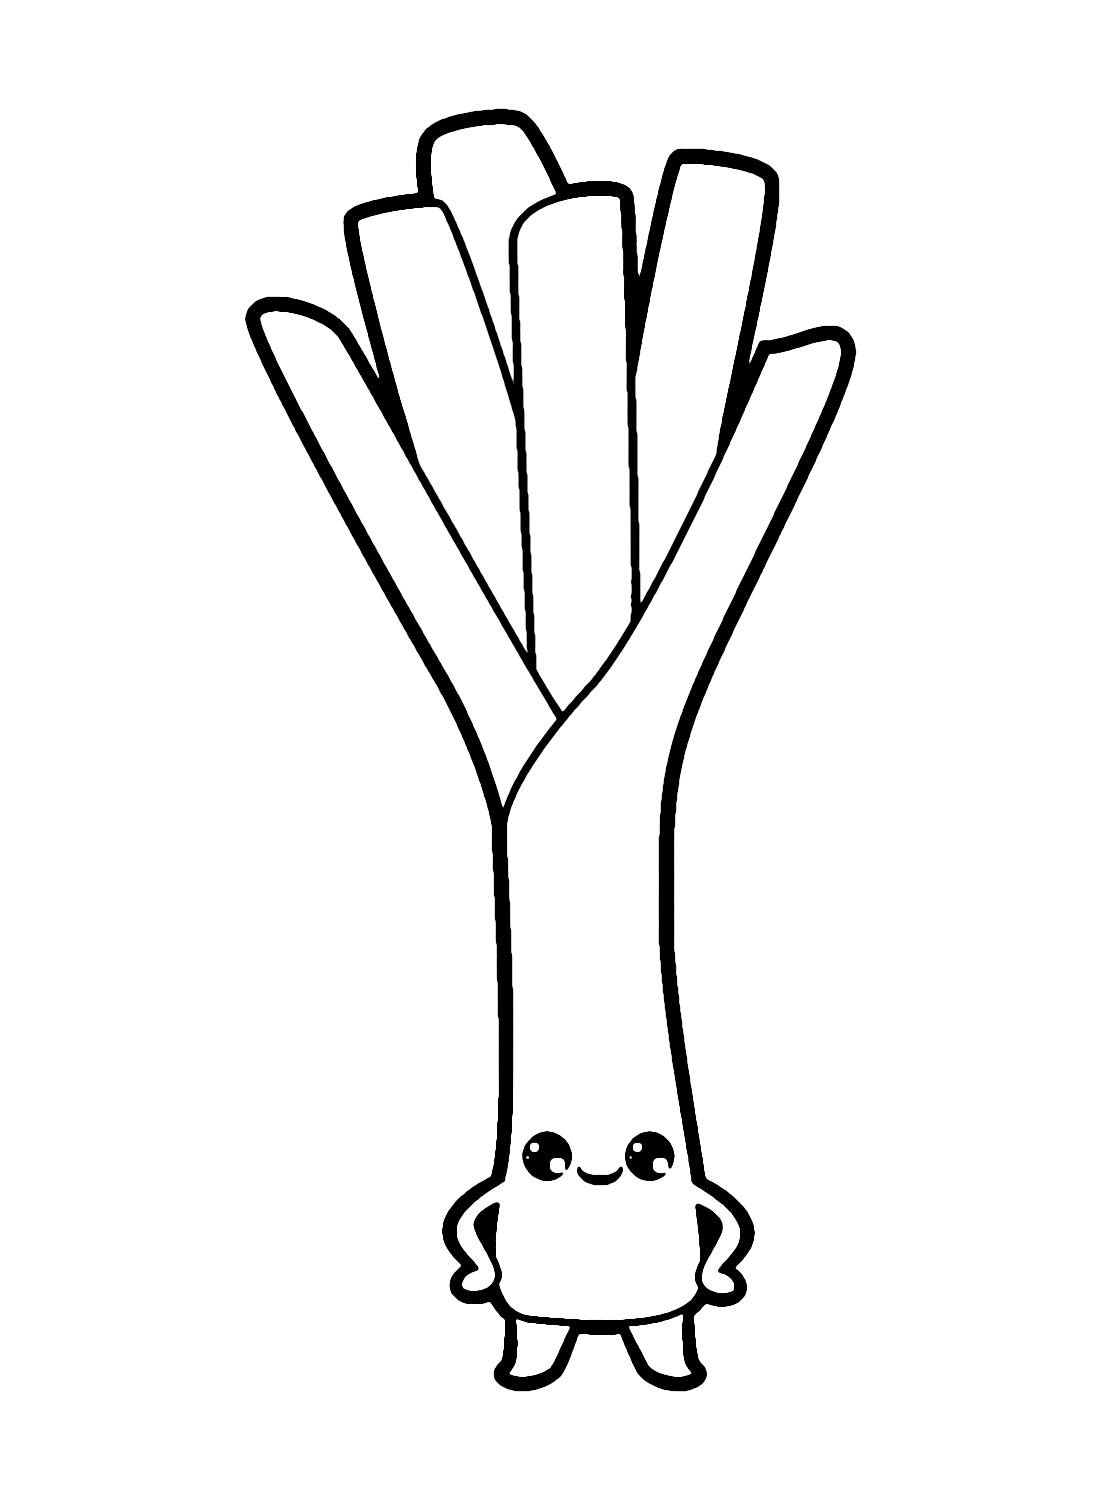 Leek coloring pages cartoon coloring pages vegetable coloring pages coloring pages